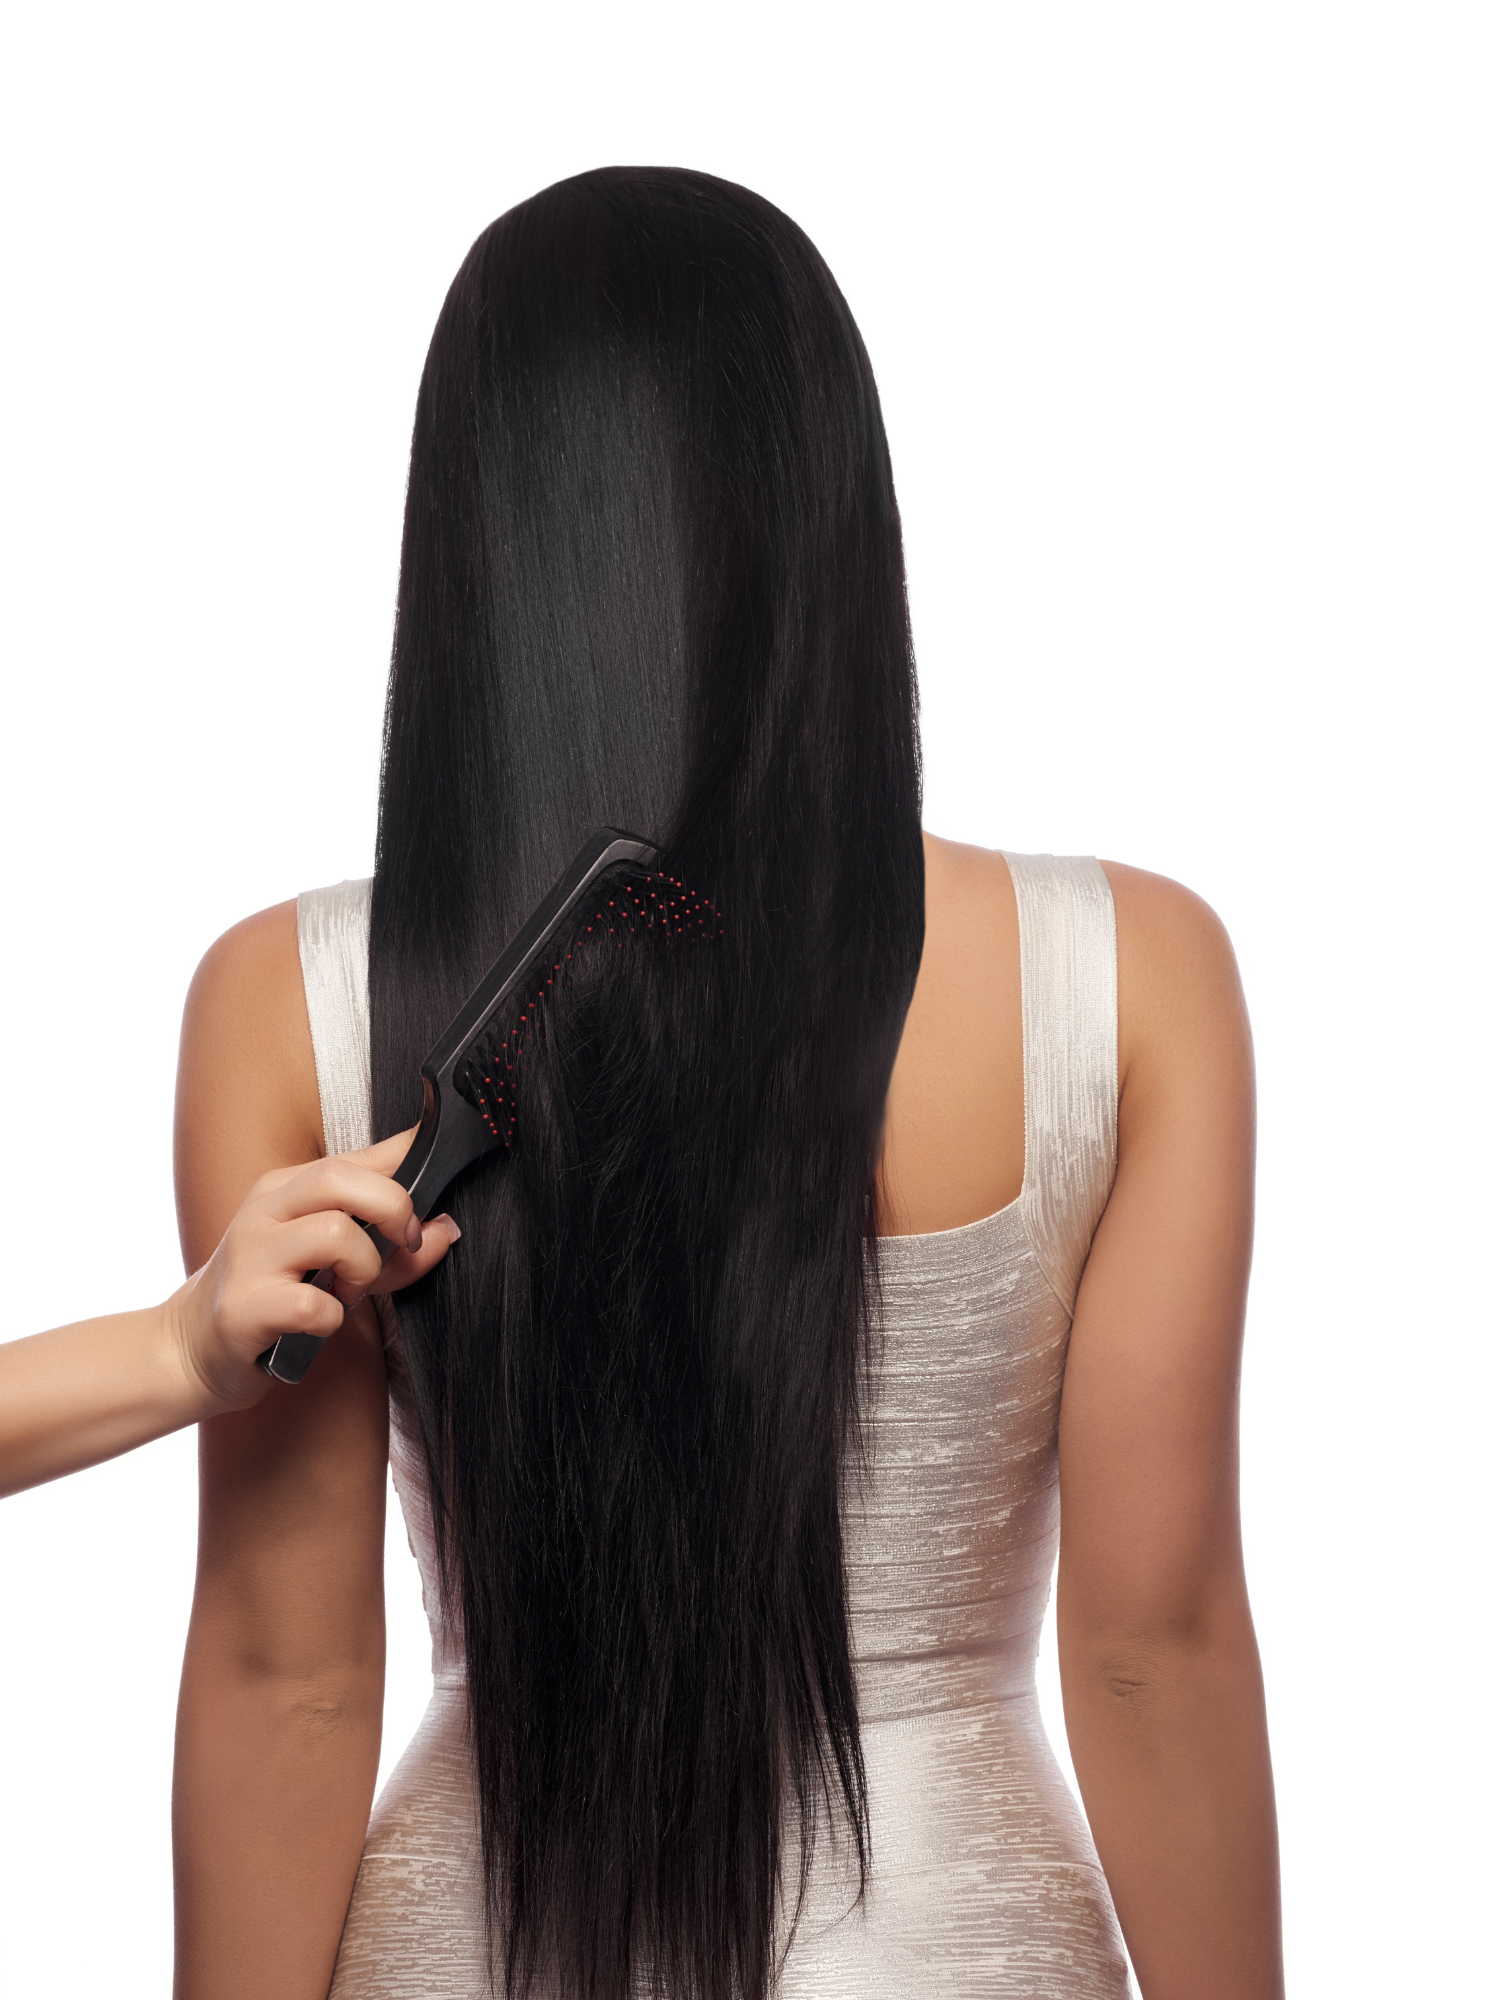 7 Of The Best Hair Straightening Products For Black Hair — Haiirology